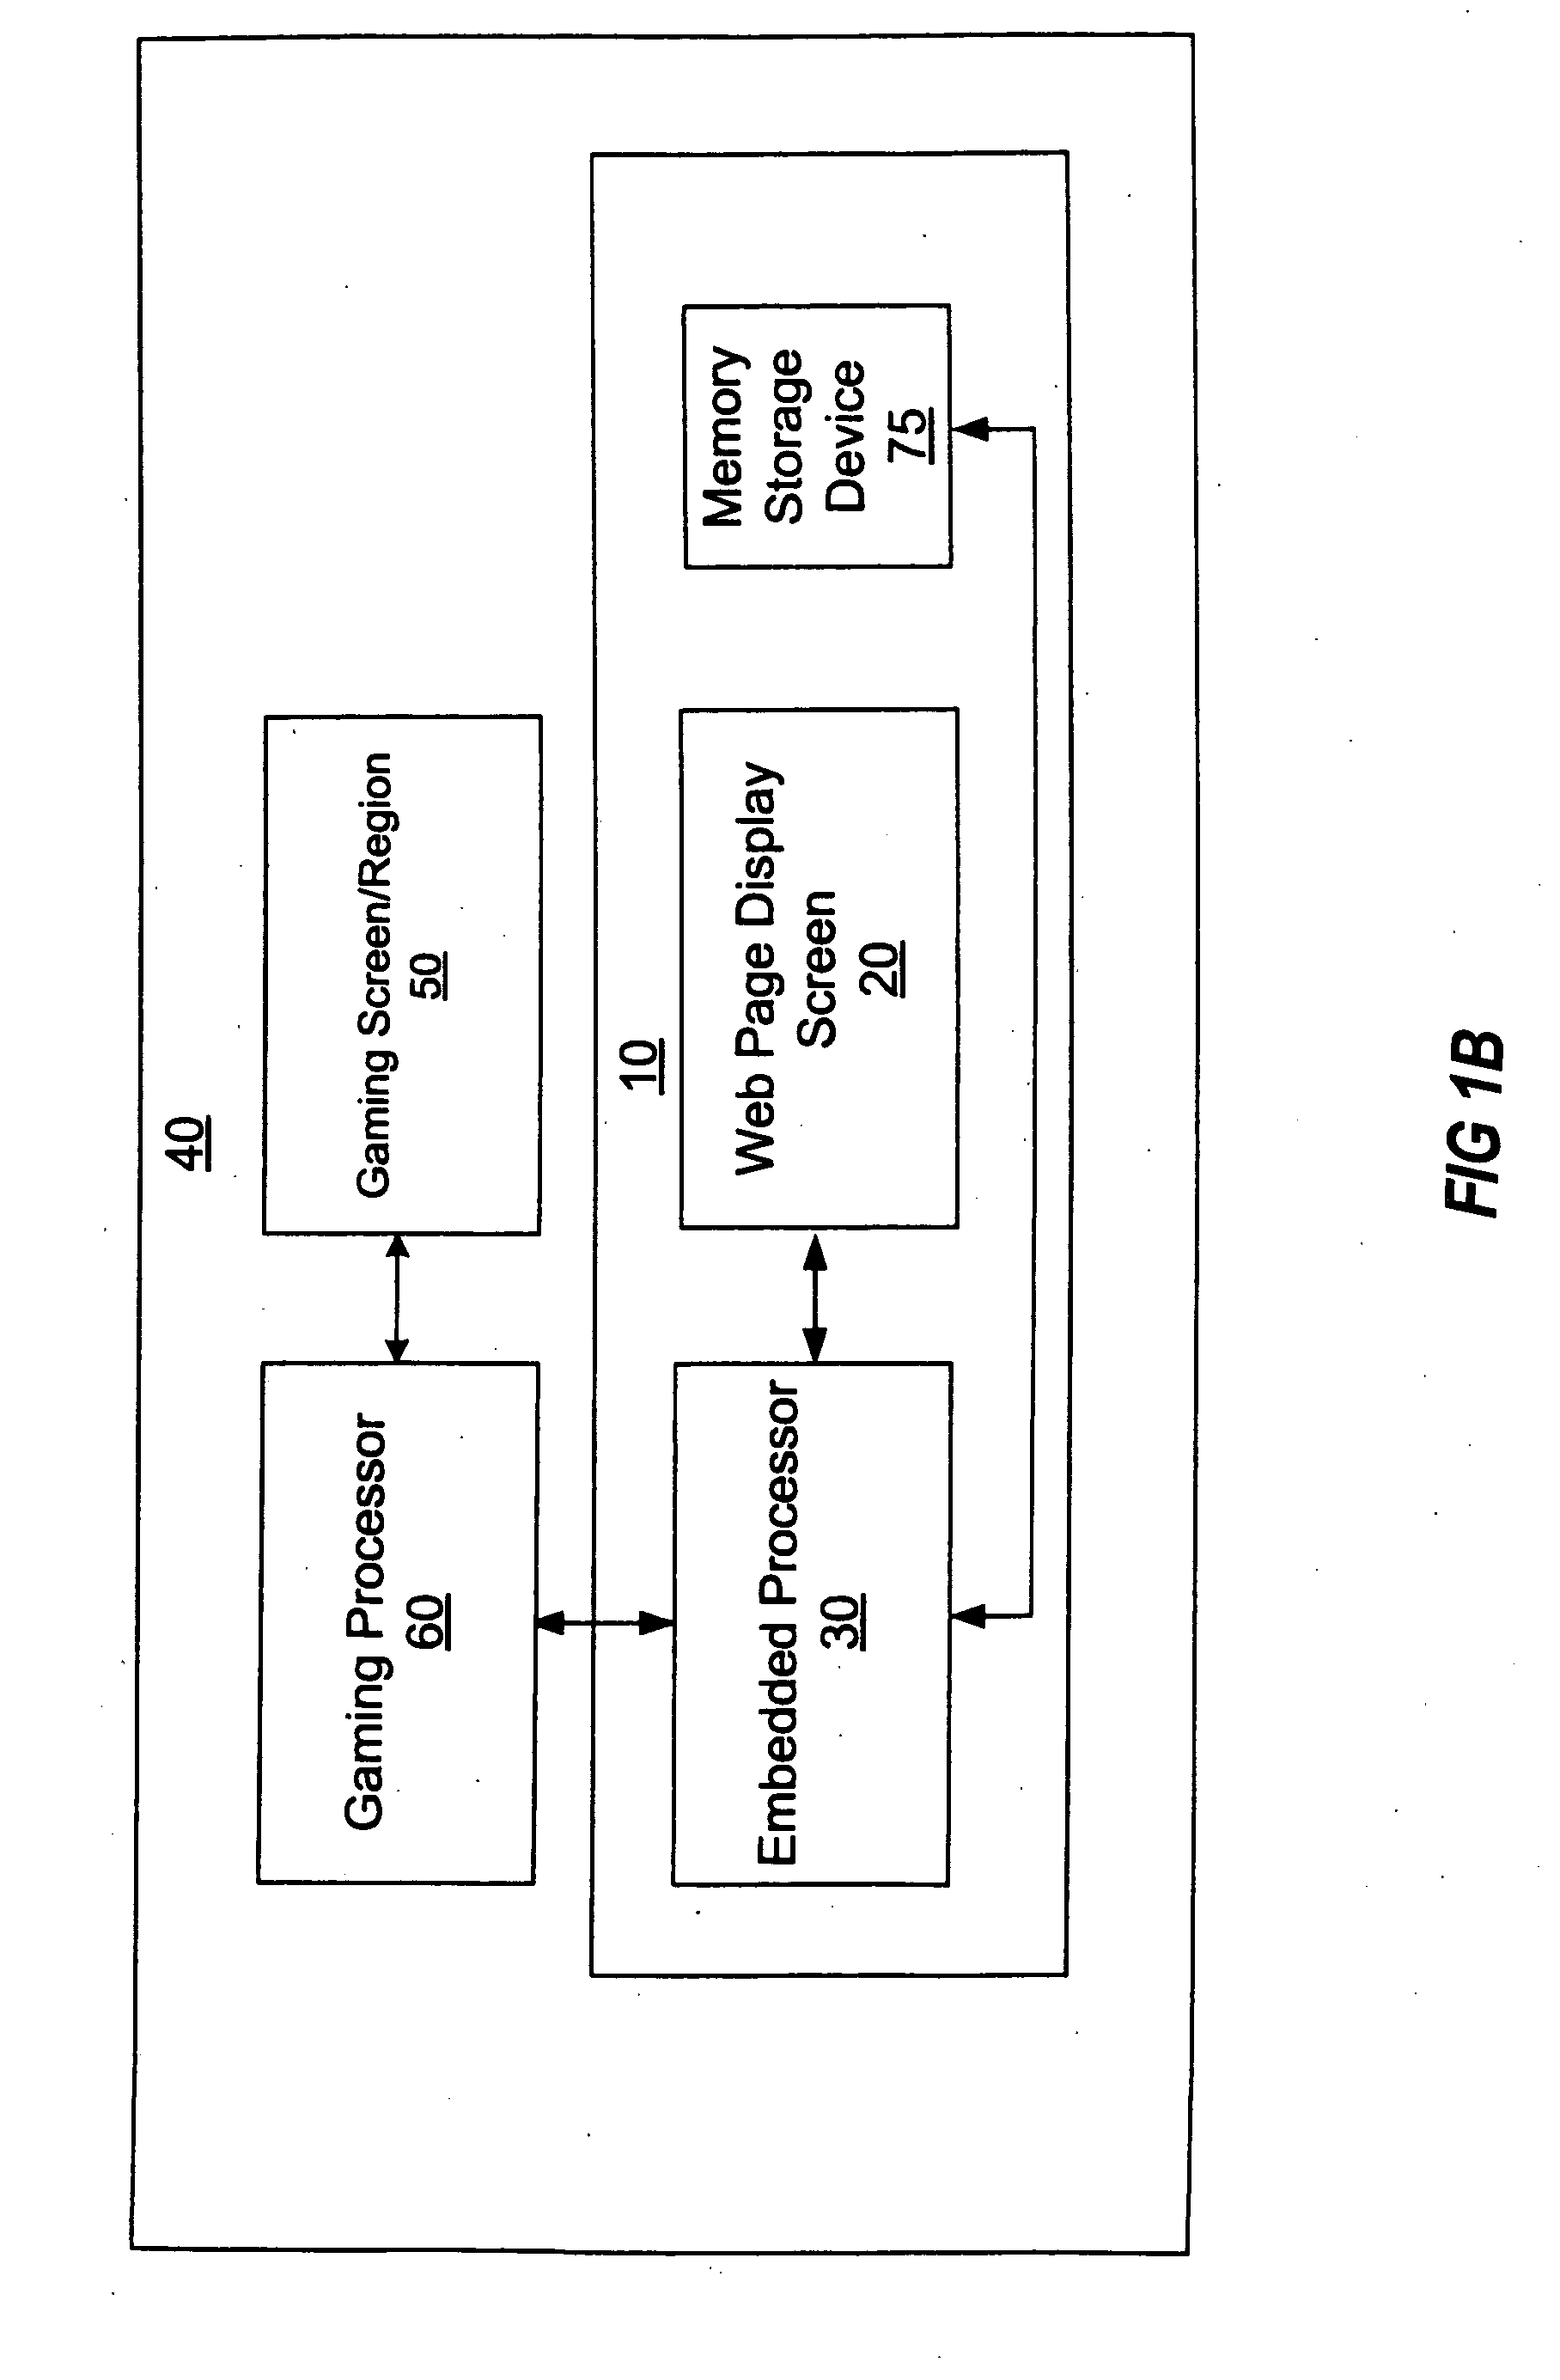 Gaming device network managing system and method